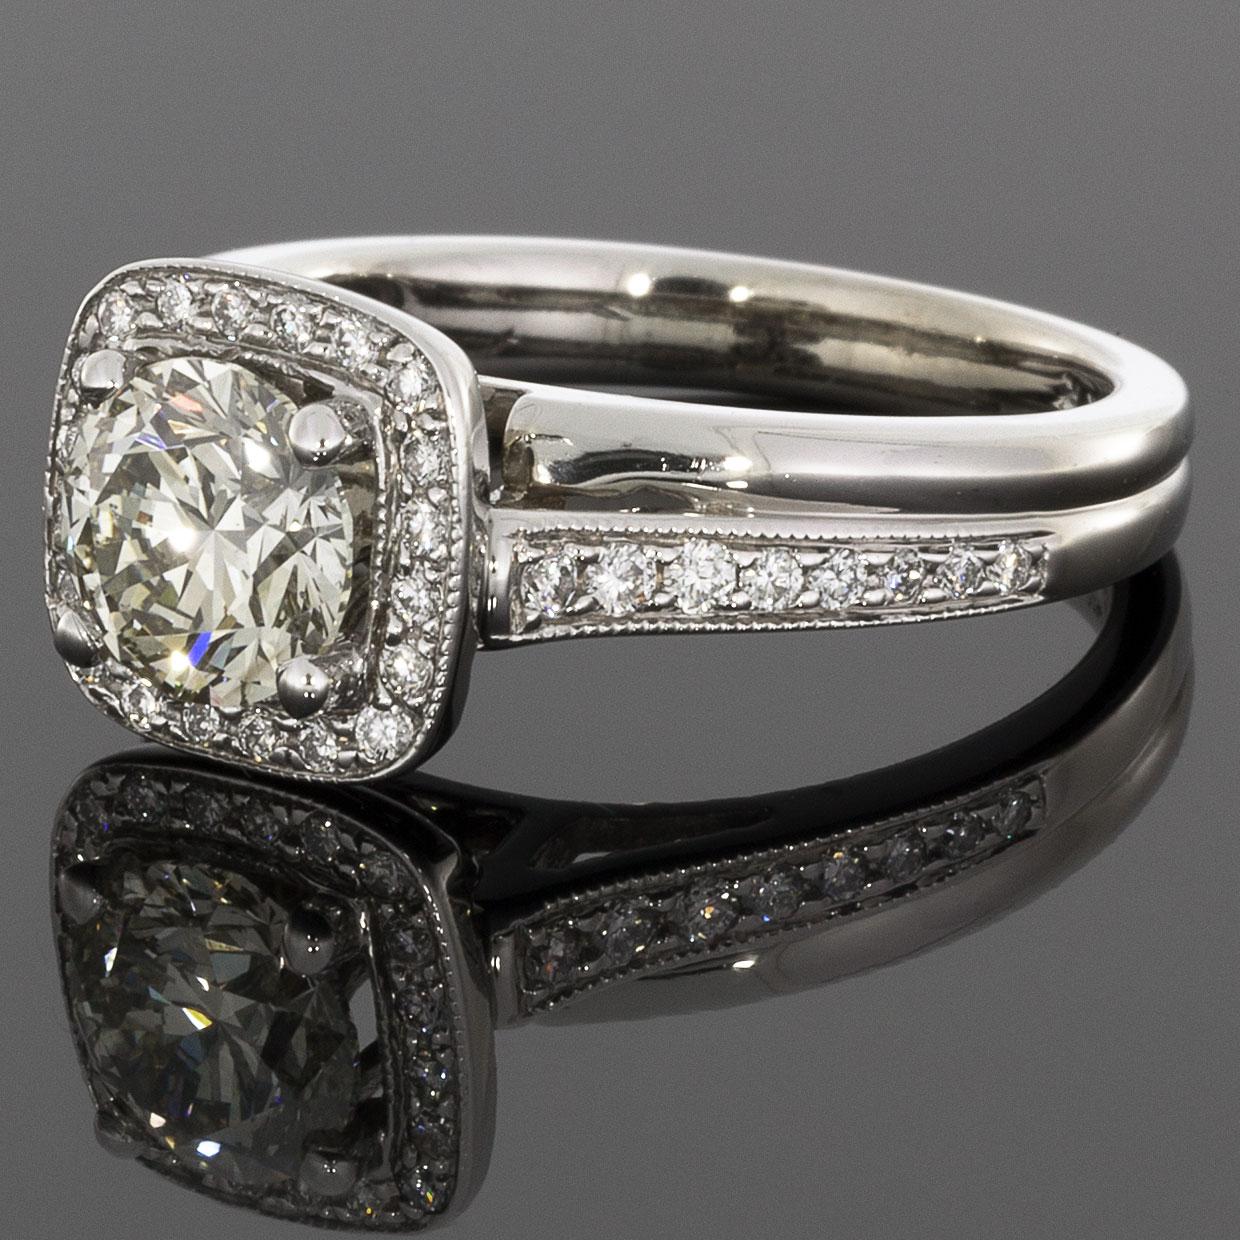 Item Details:
Estimated Retail - $7,000.00
Metal - 14 Karat White Gold
Total Carat Weight (TCW) - 1.60 ctw
Style - Vintage Style Bypass Halo Engagement Ring
Ring Size - 6.00
Sizable - Yes
Width - 4.15 mm

Stone 1 Information:
Stone Type -